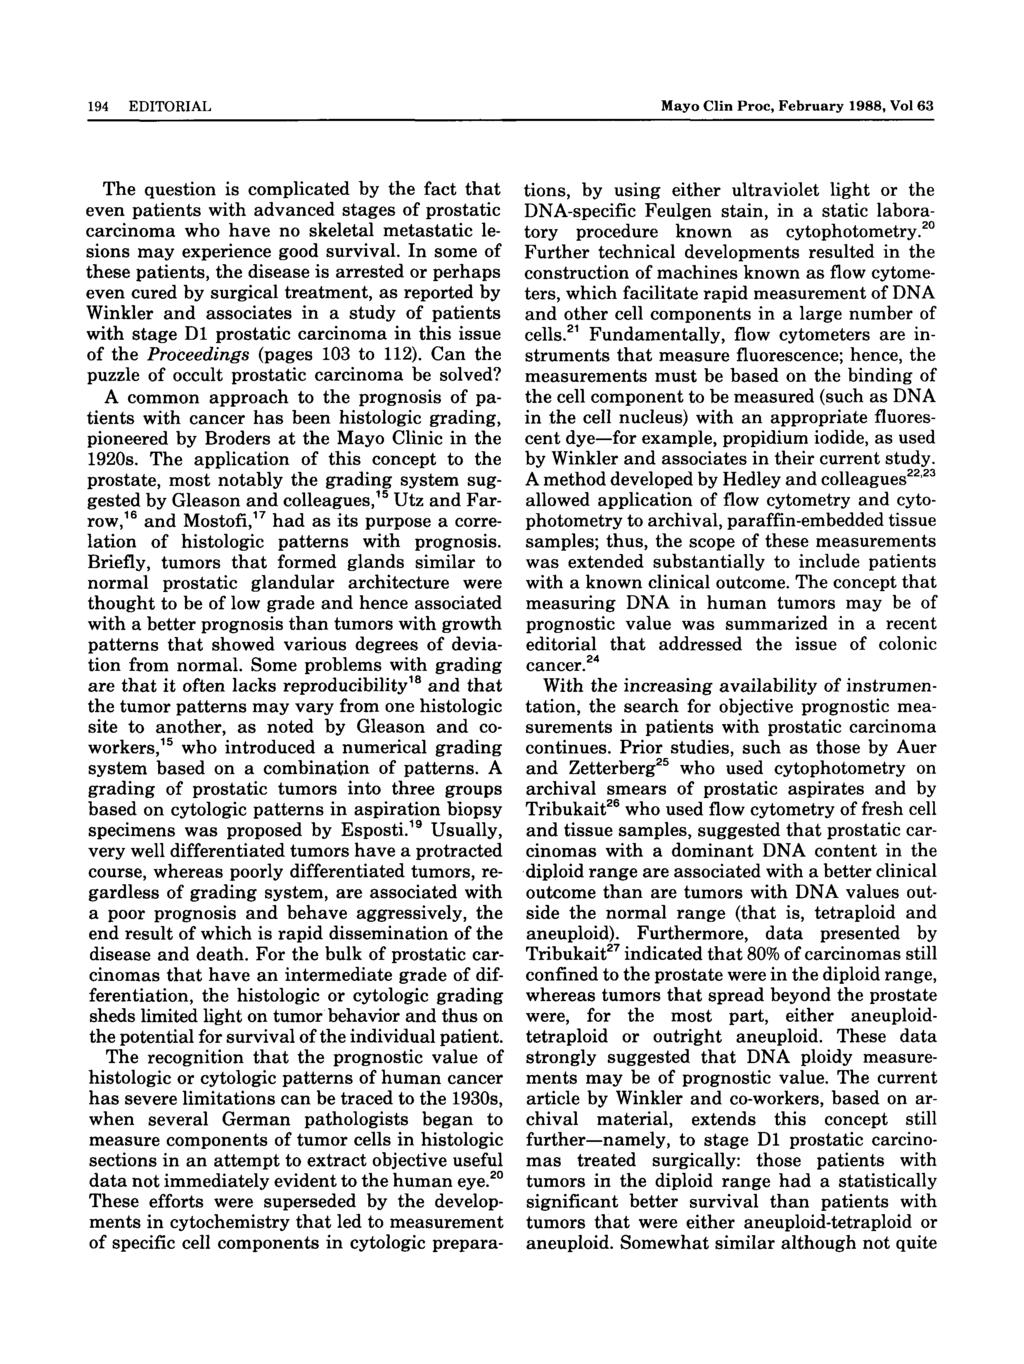 194 EDITORIAL Mayo Clin Proc, February 1988, Vol 63 The question is complicated by the fact that even patients with advanced stages of prostatic carcinoma who have no skeletal metastatic lesions may